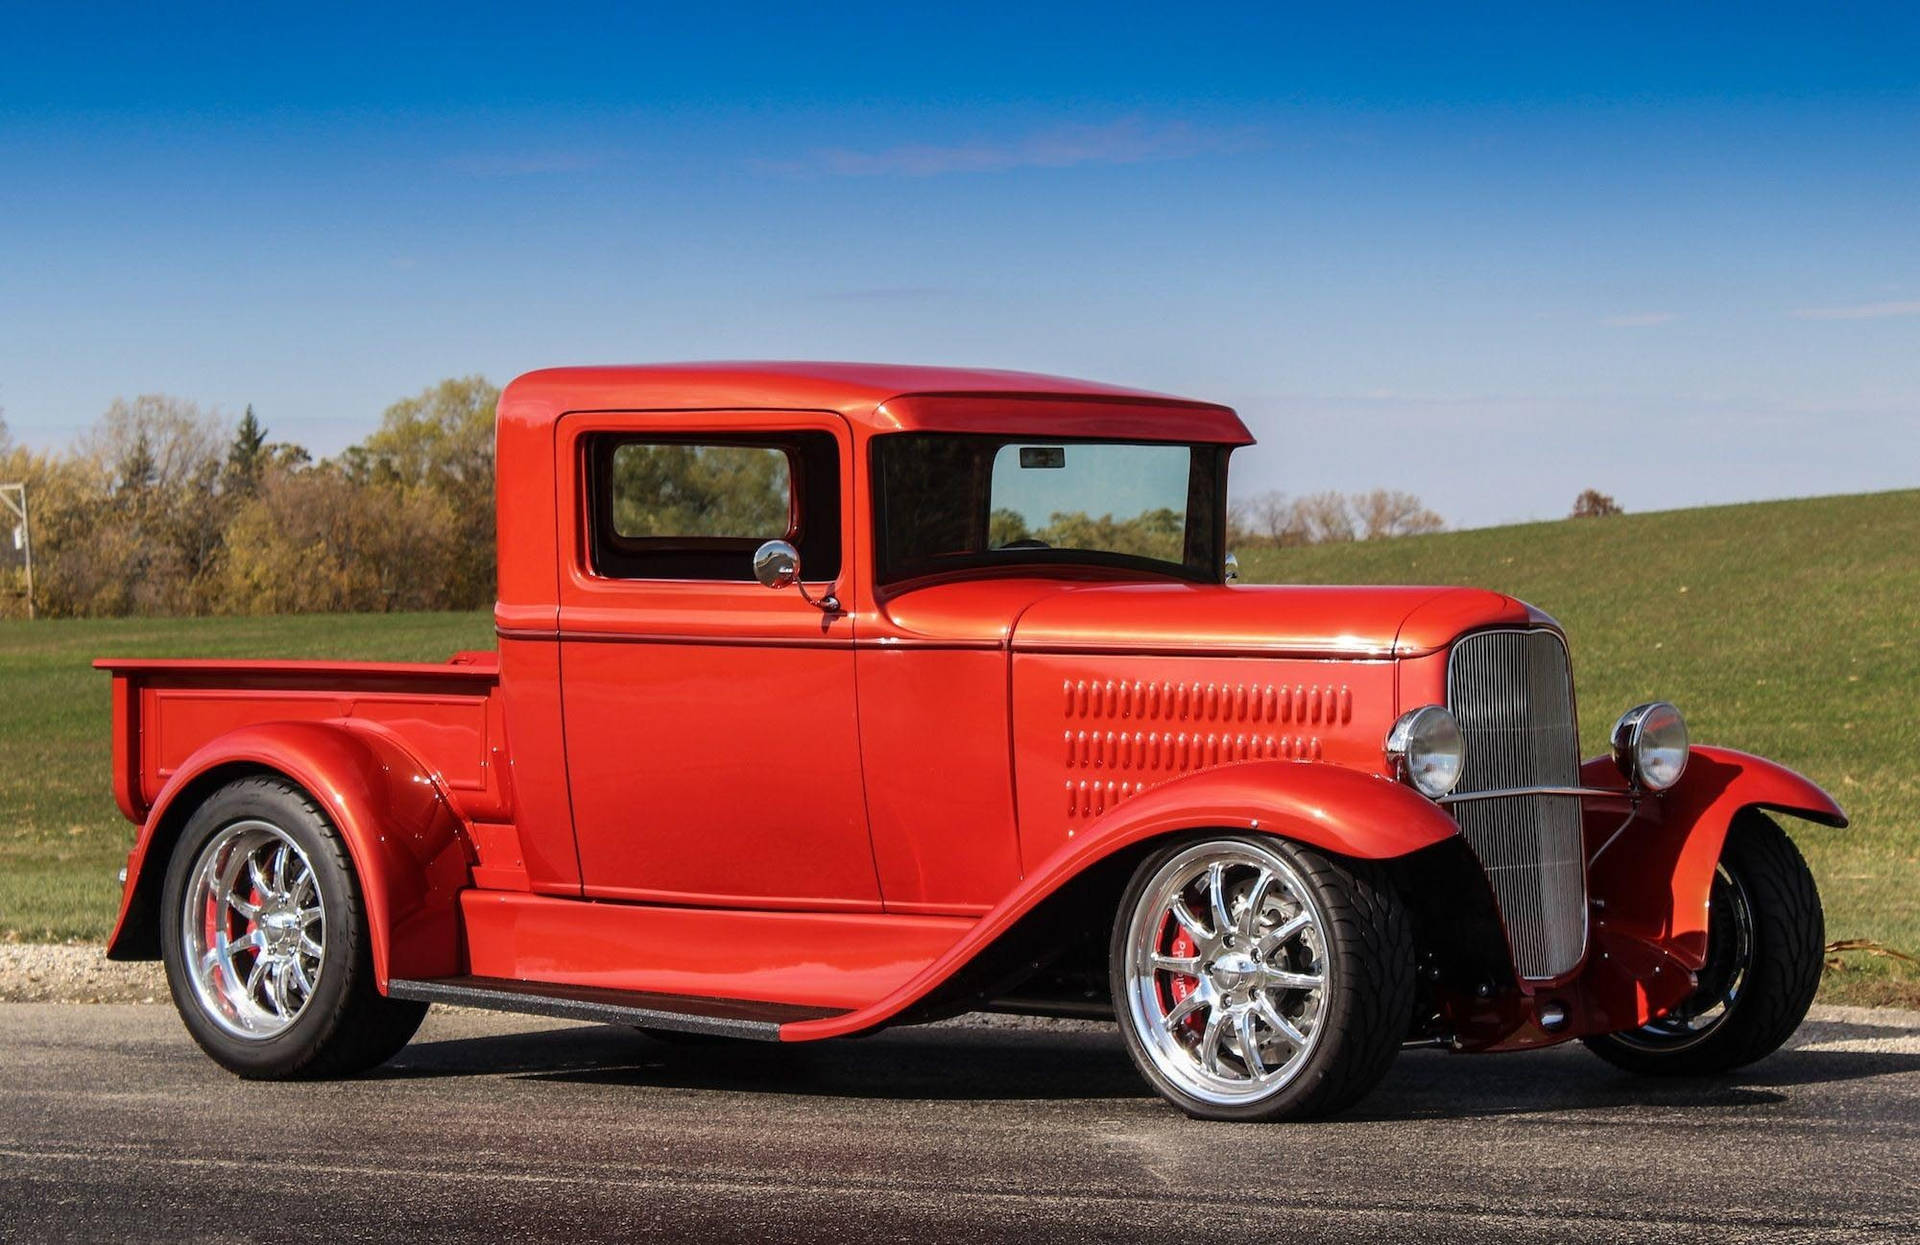 1935 Red Old Ford Truck